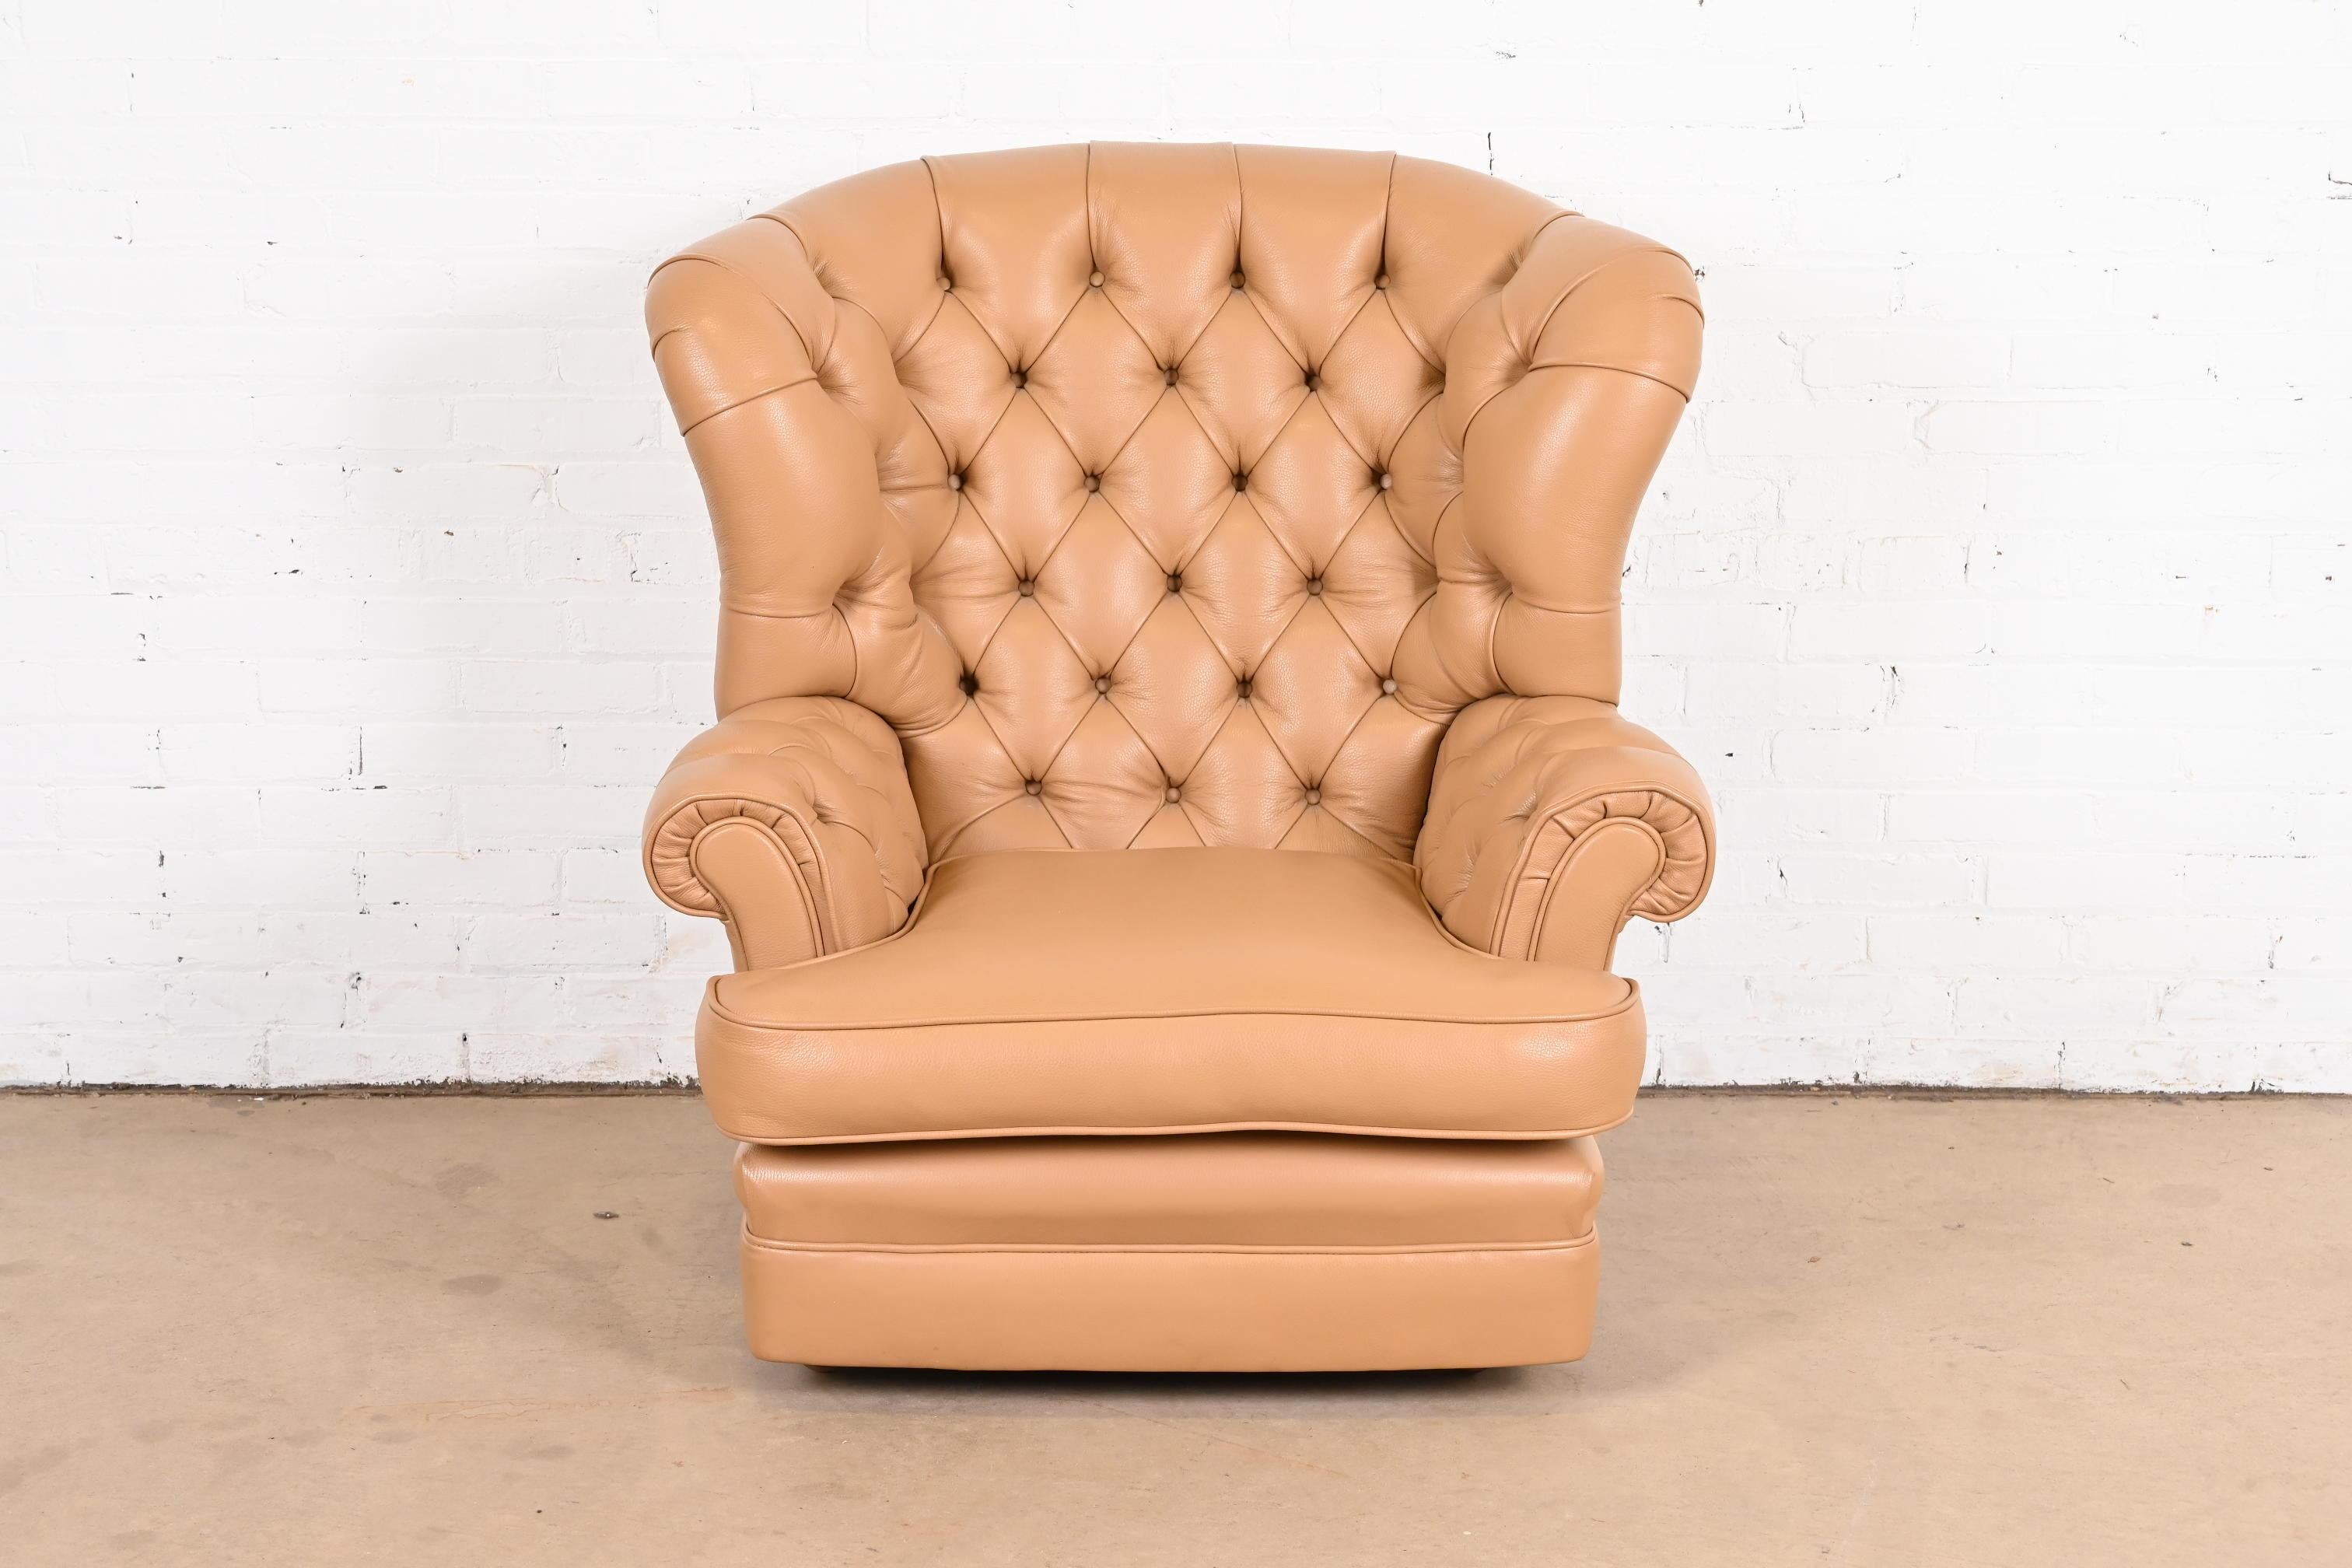 American Vintage Tufted Leather Chesterfield Wingback Lounge Chair For Sale